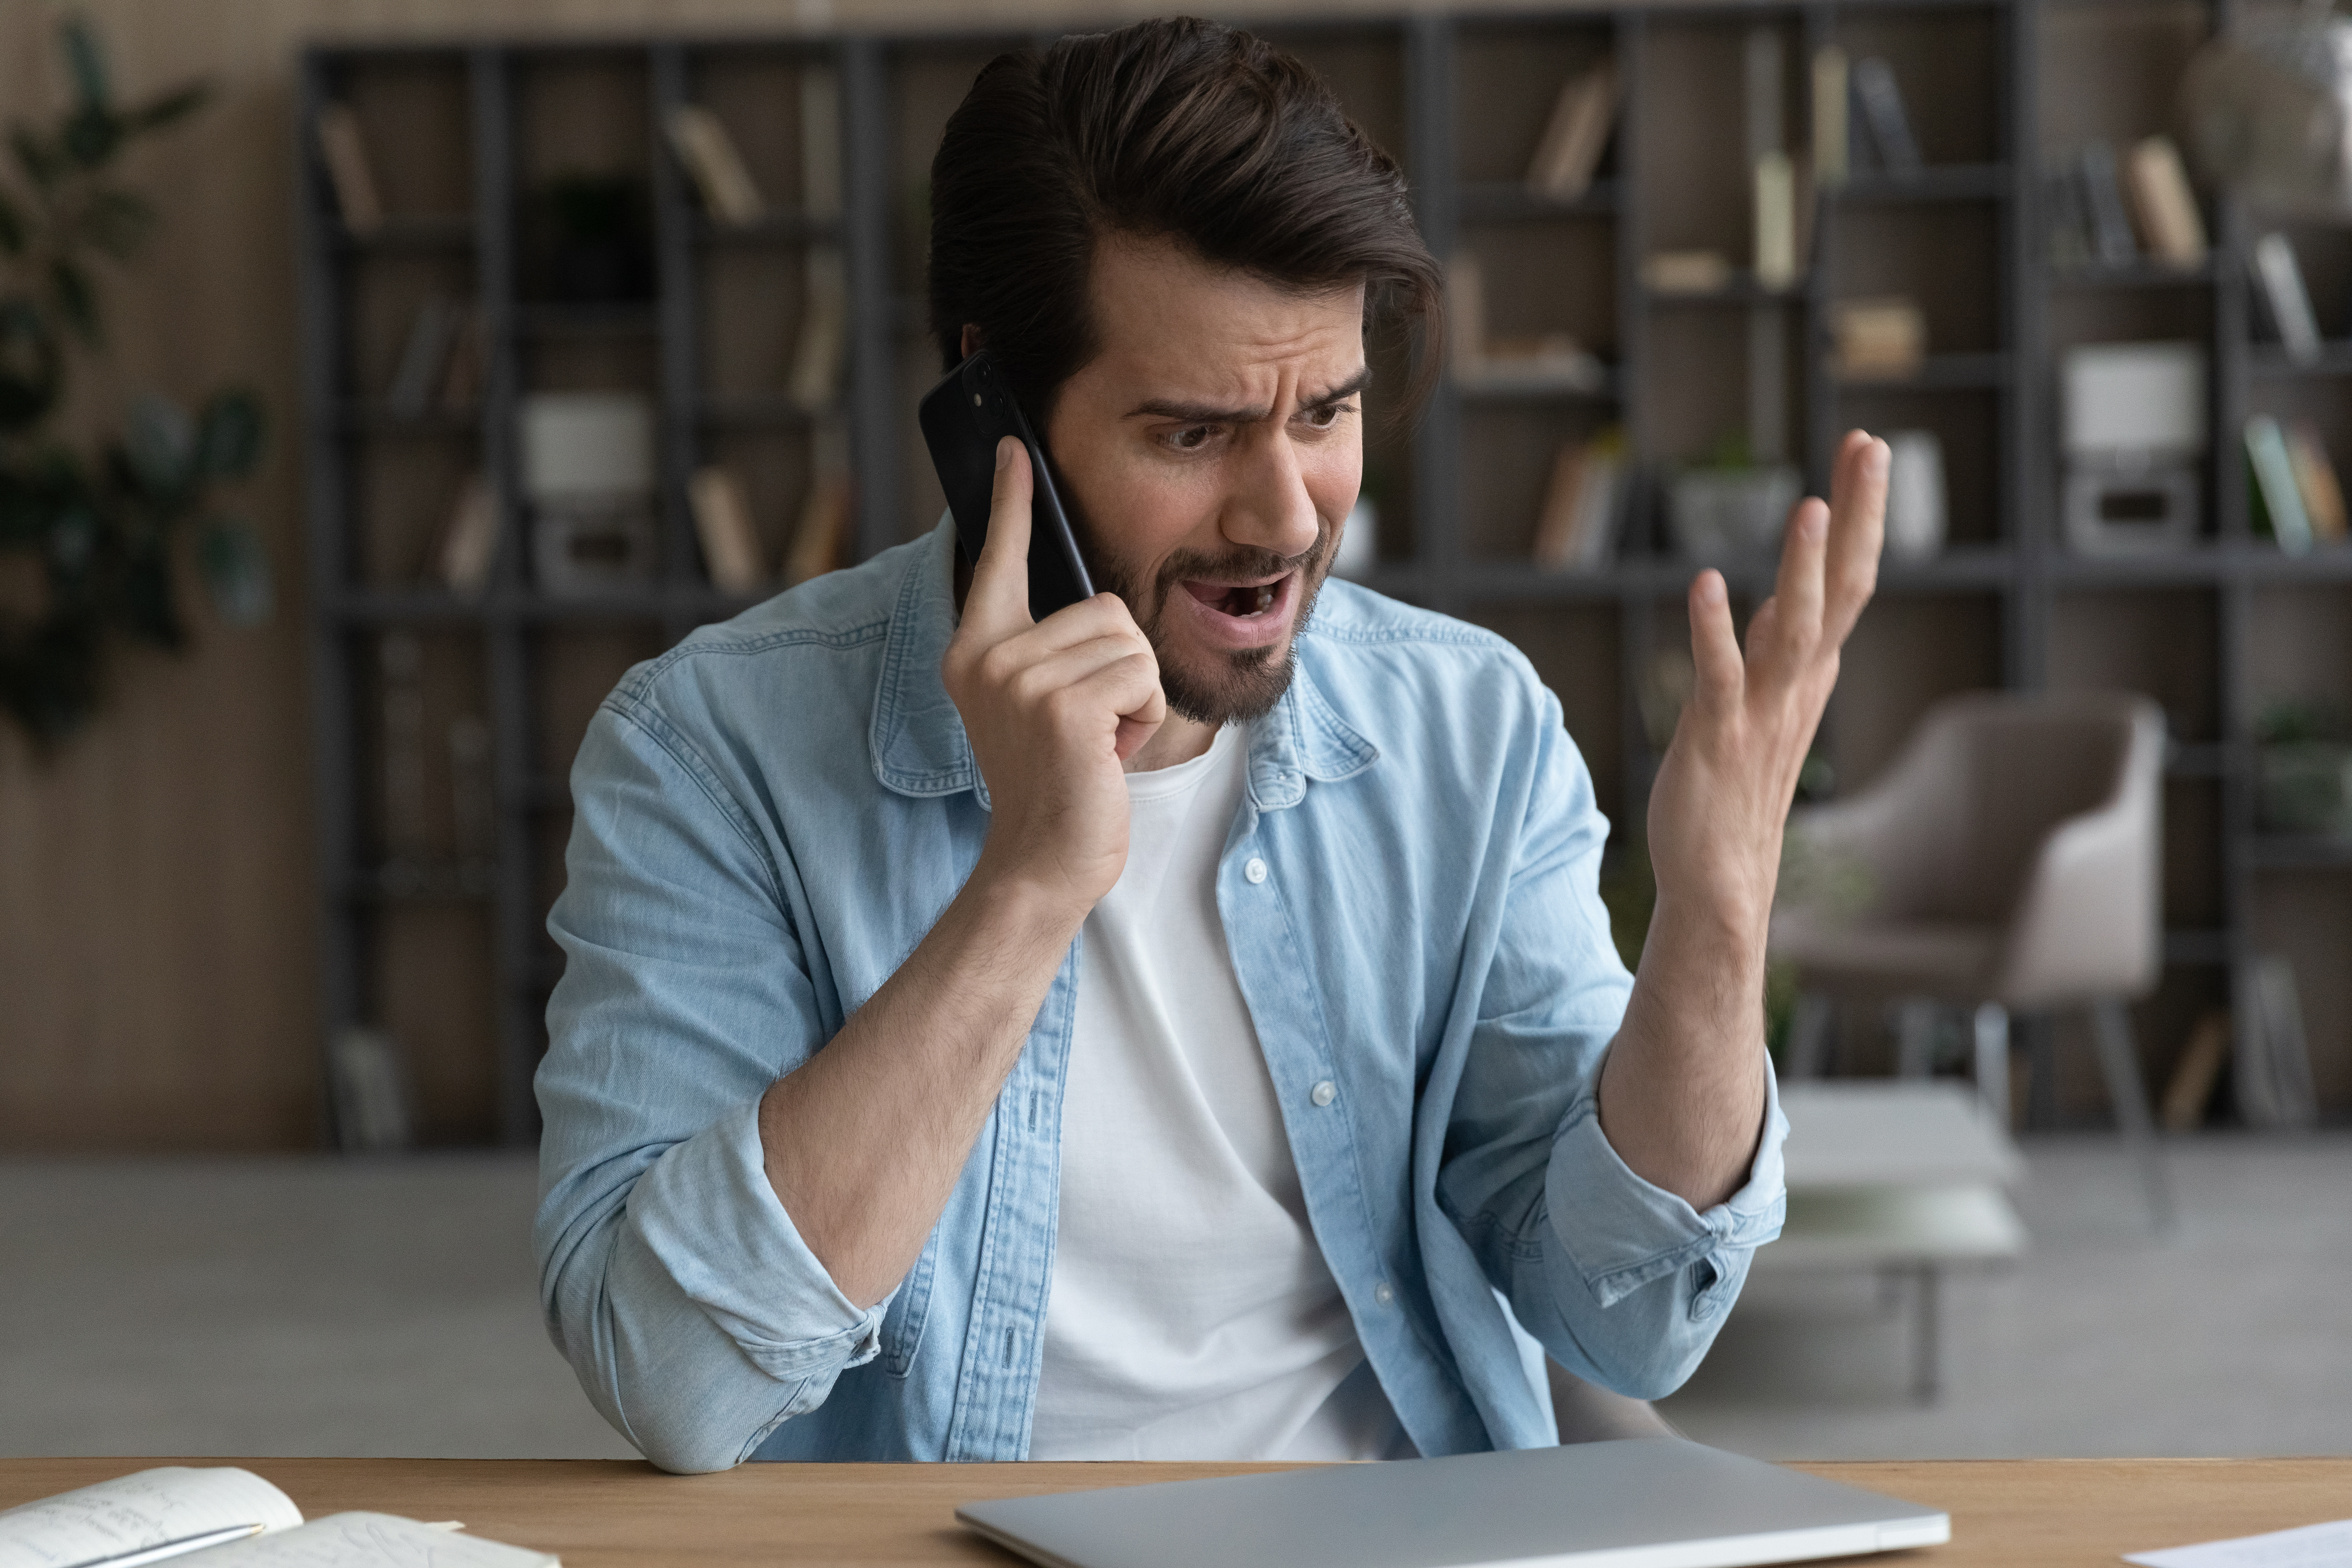 A man expressing anger on the phone | Source: Shutterstock